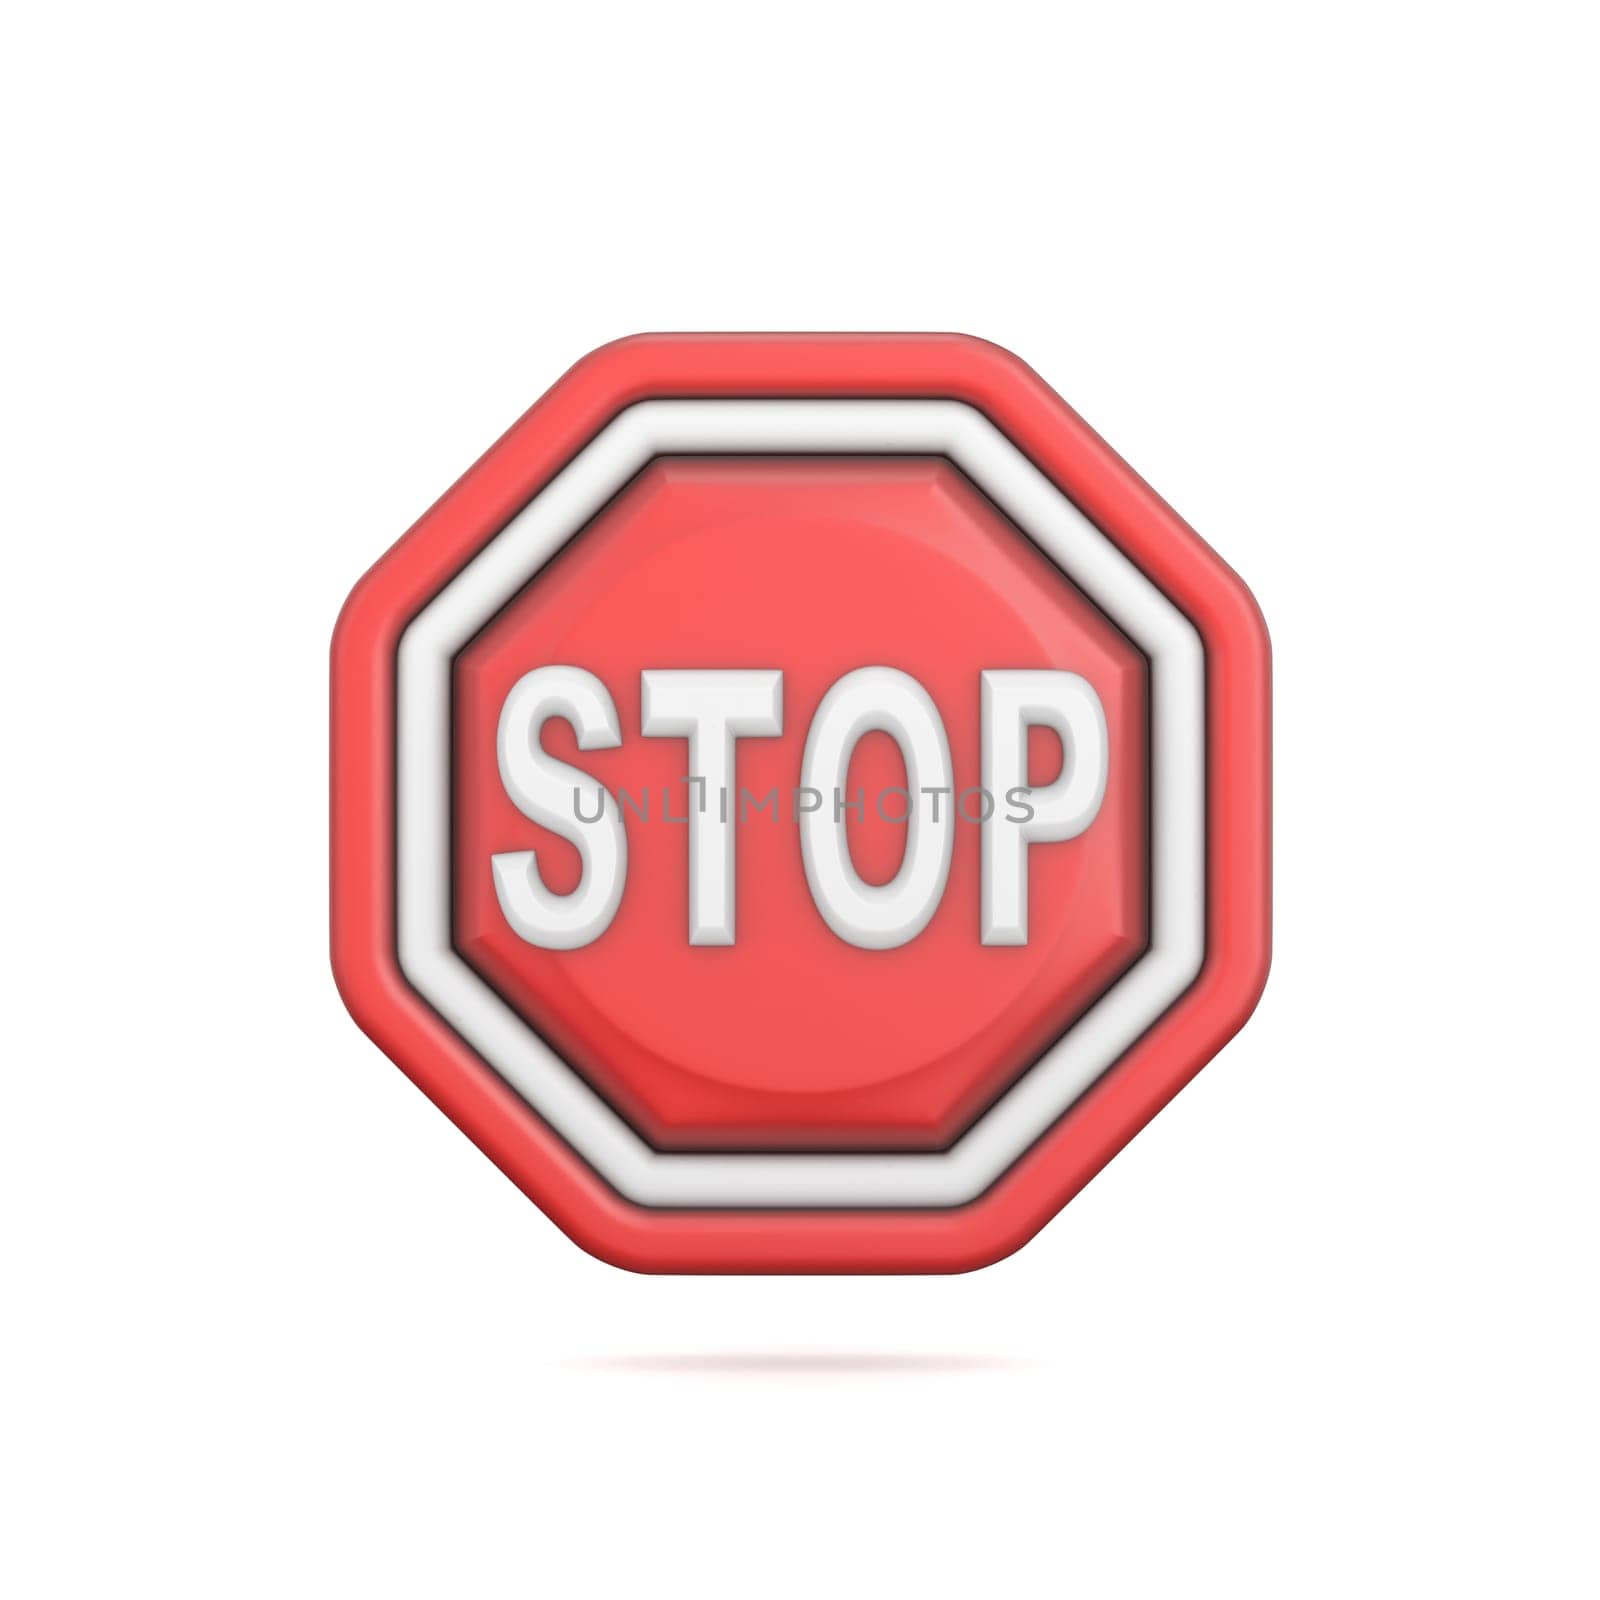 Traffic sign Stop sign 3D rendering illustration isolated on white background